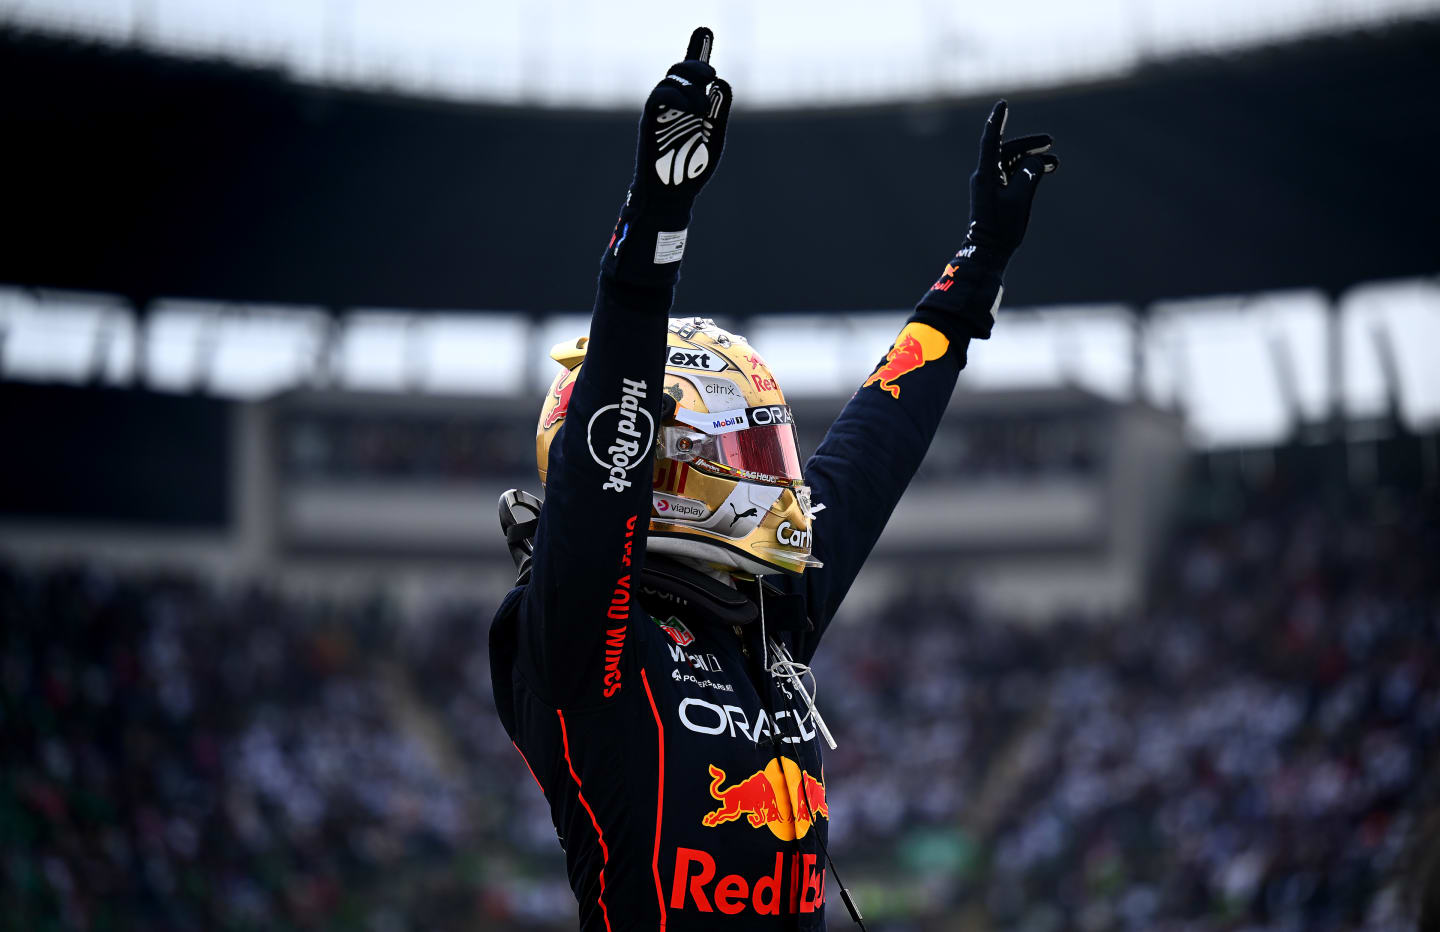 MEXICO CITY, MEXICO - OCTOBER 30: Race winner Max Verstappen of the Netherlands and Oracle Red Bull Racing celebrates in parc ferme during the F1 Grand Prix of Mexico at Autodromo Hermanos Rodriguez on October 30, 2022 in Mexico City, Mexico. (Photo by Clive Mason - Formula 1/Formula 1 via Getty Images)